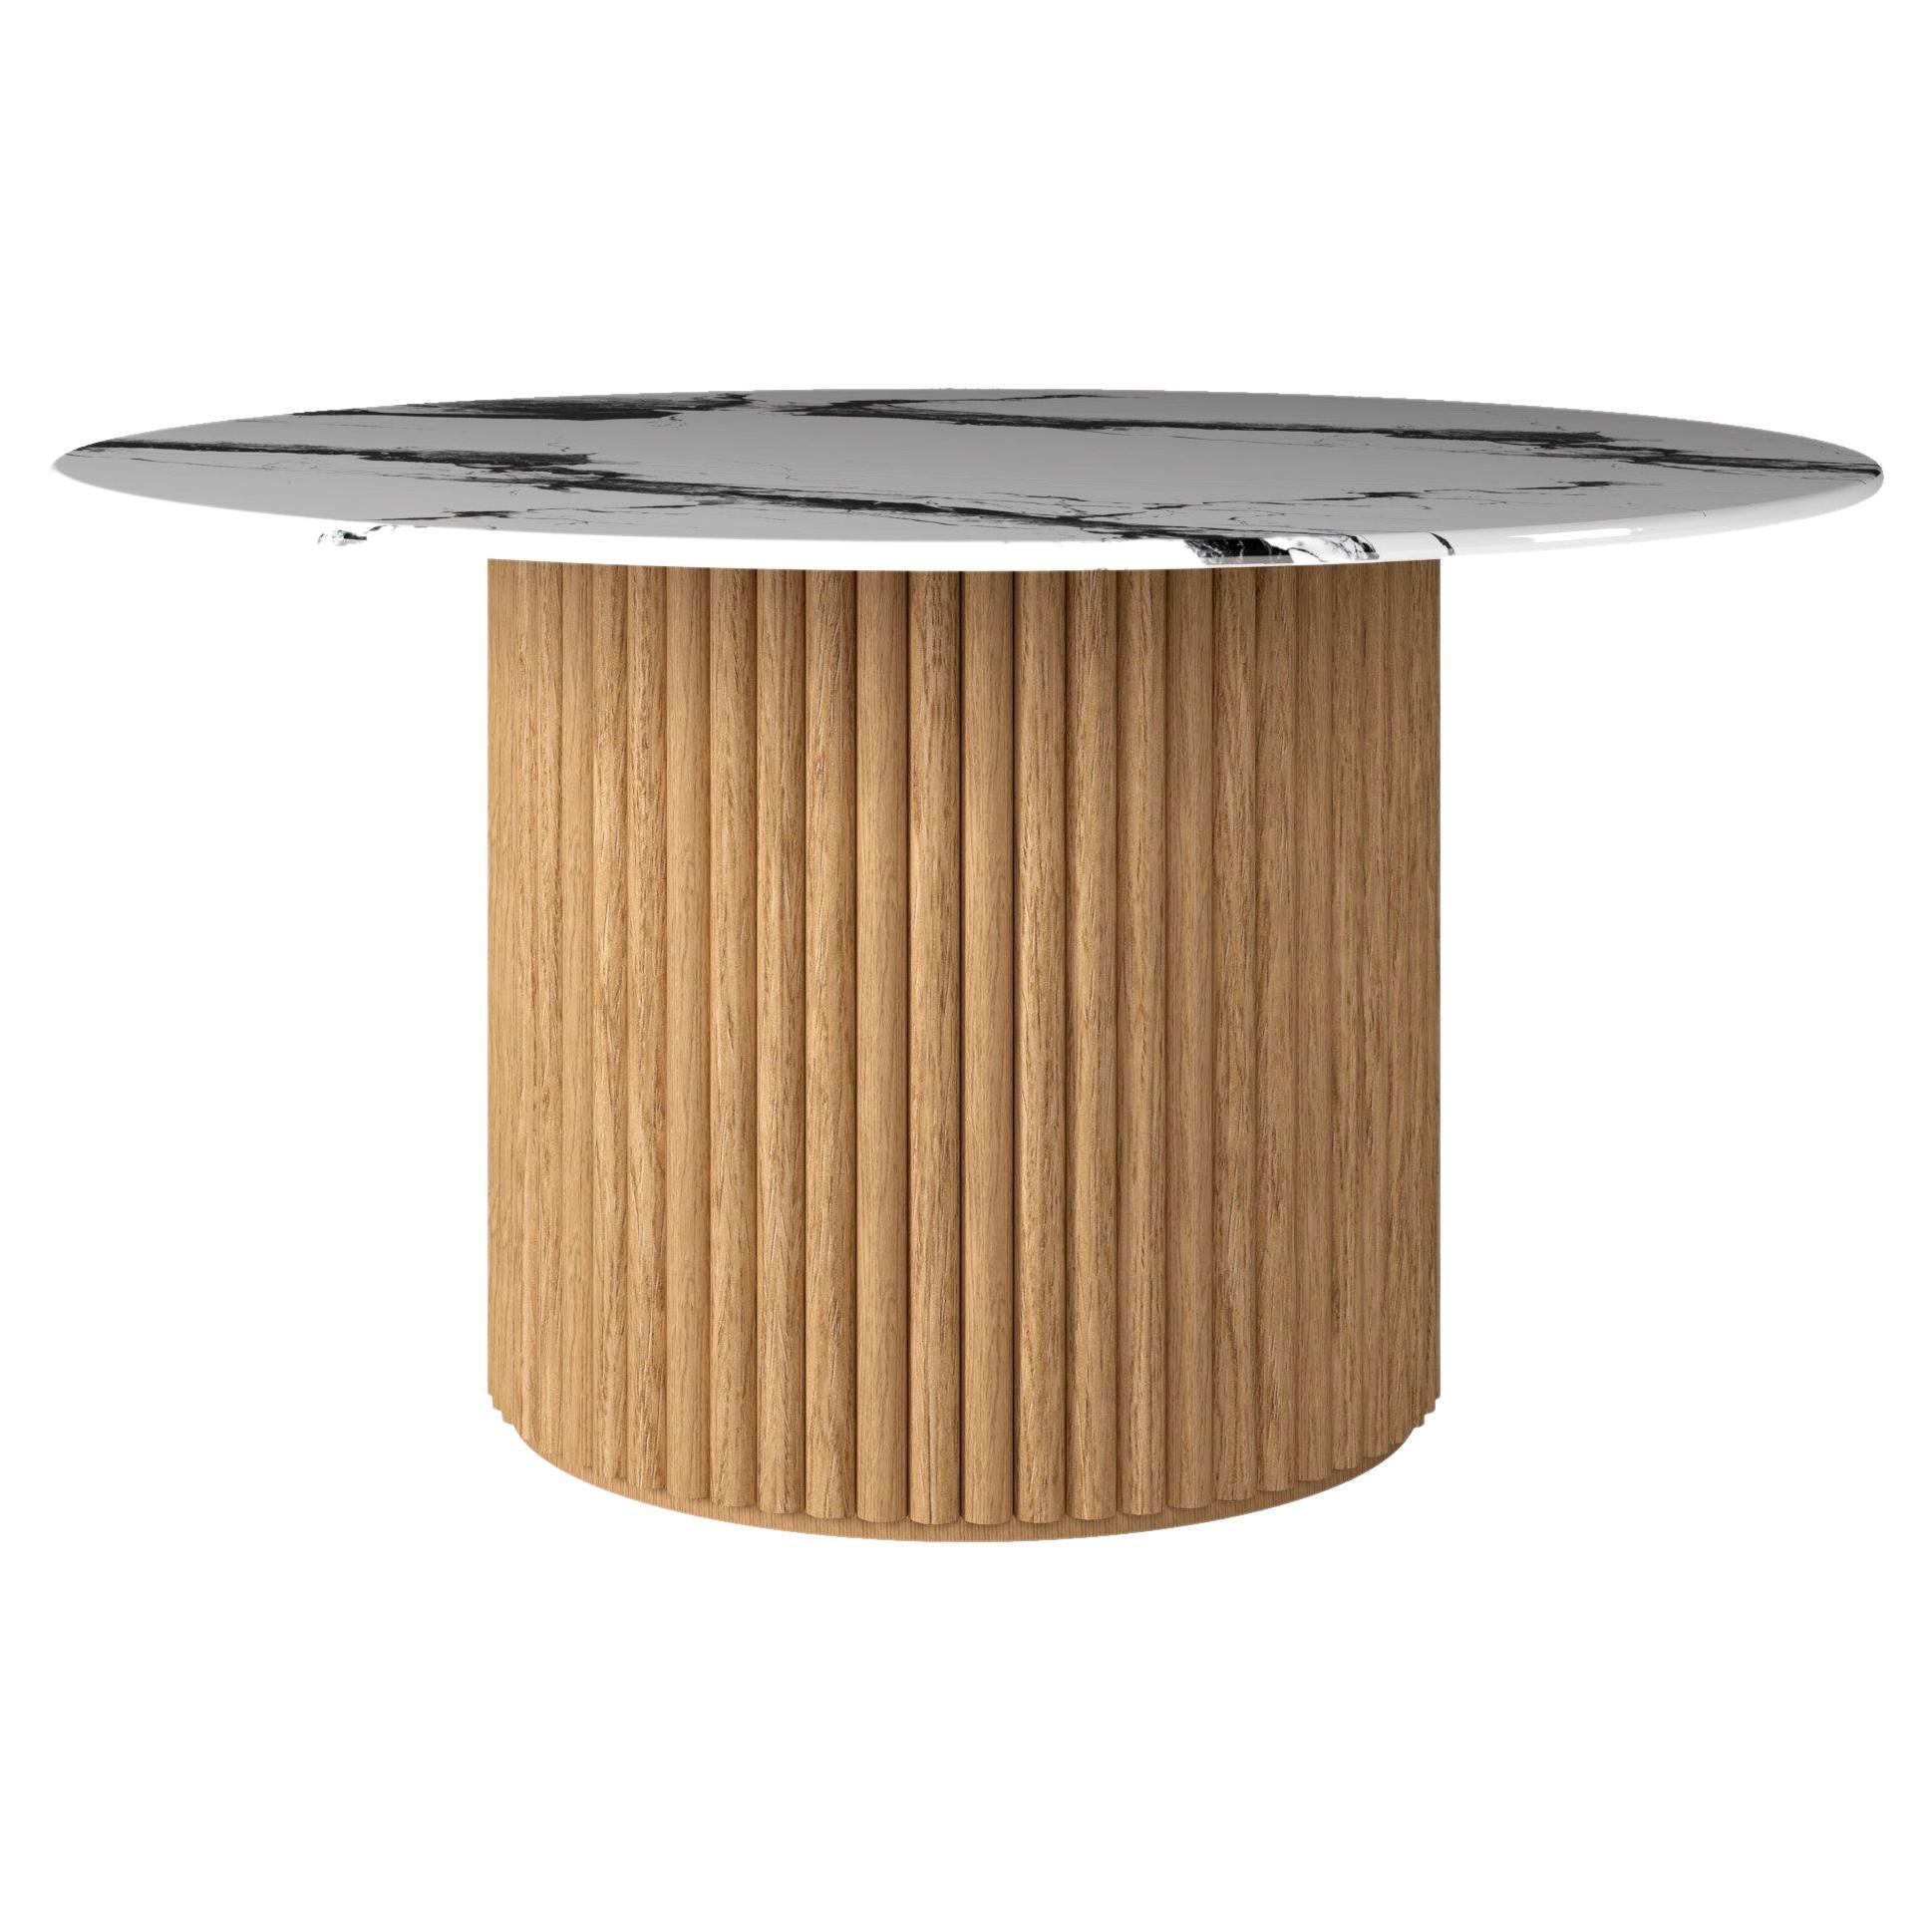 𝗣𝗿𝗼𝗱𝘂𝗰𝘁 𝗗𝗲𝘁𝗮𝗶𝗹𝘀:
When exceptional effort is put into wood and marble crafting combined with a Scandinavian sensibility the results are bound to be stunning. The simple table series uses natural elements to present itself in a